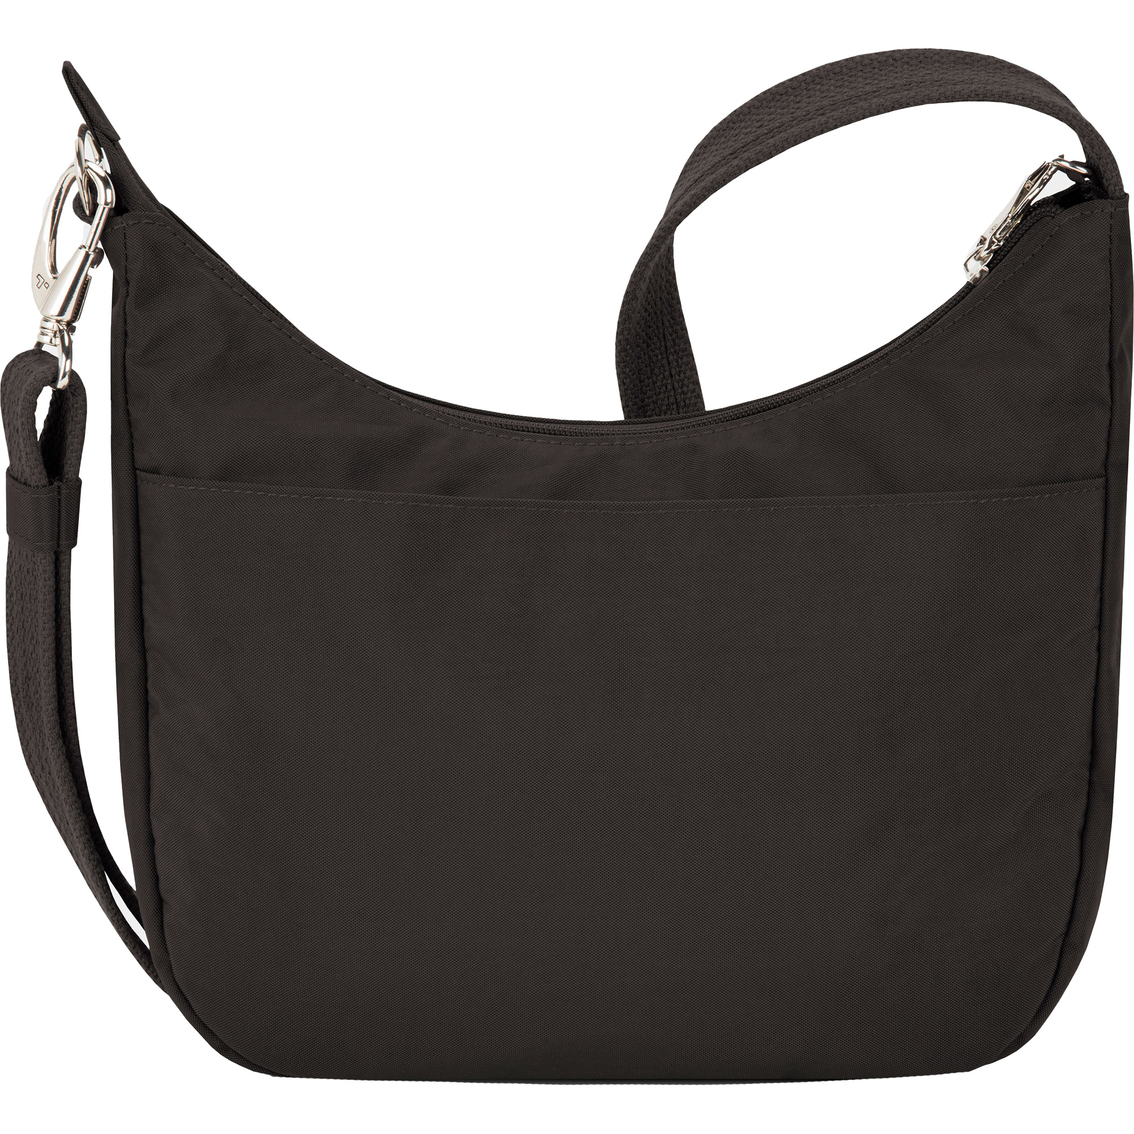 Travelon Anti Theft Essentials East/West Hobo Bag - Image 2 of 9